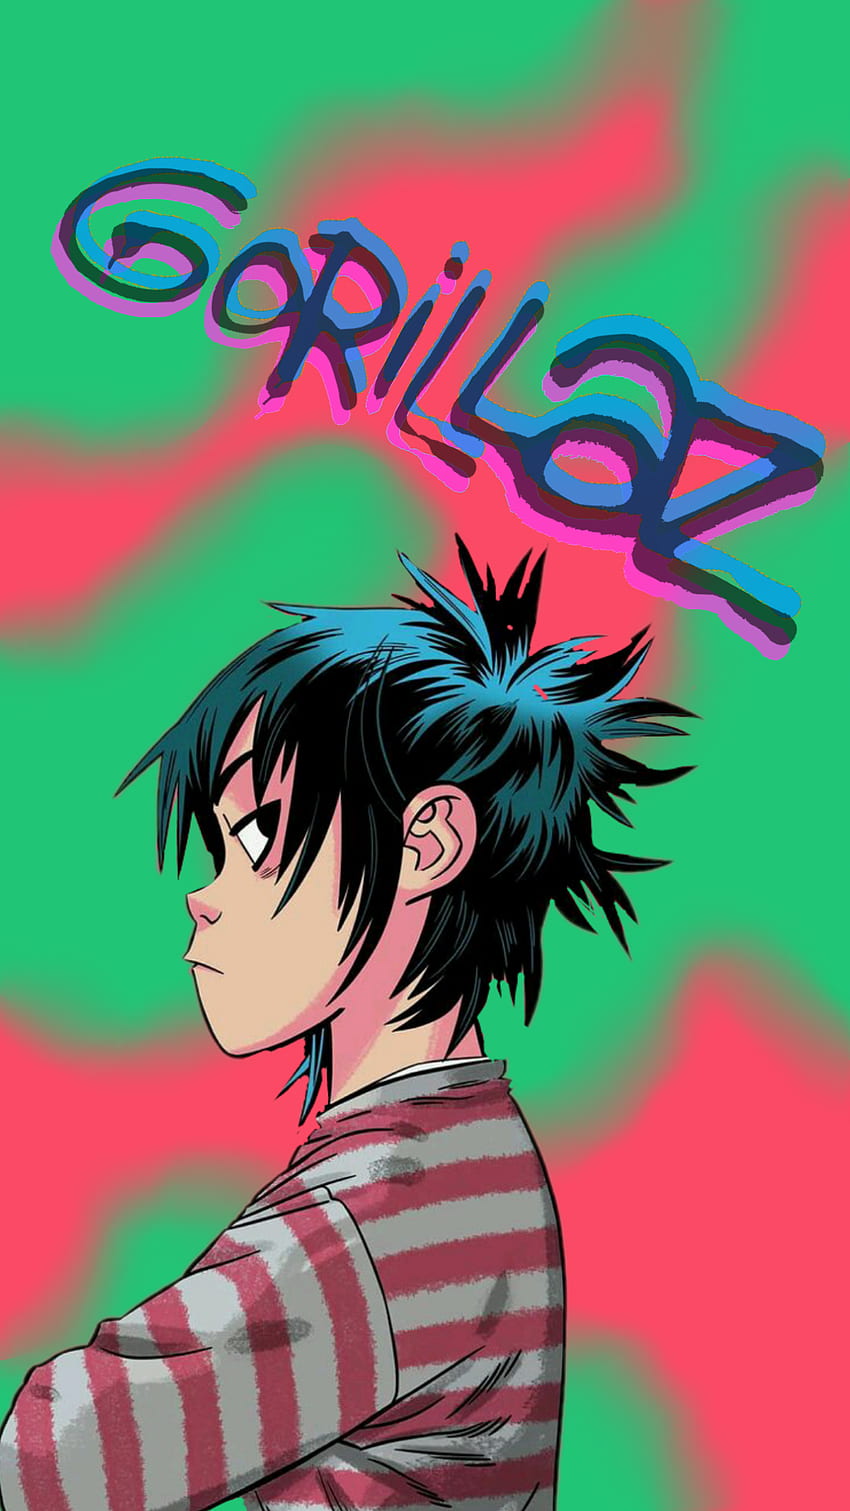 This is a noodle I made and just uploaded to zedge so if u want it search noodle on zedge or search for my name 41D4N : gorillaz, Gorillaz Noodle HD phone wallpaper